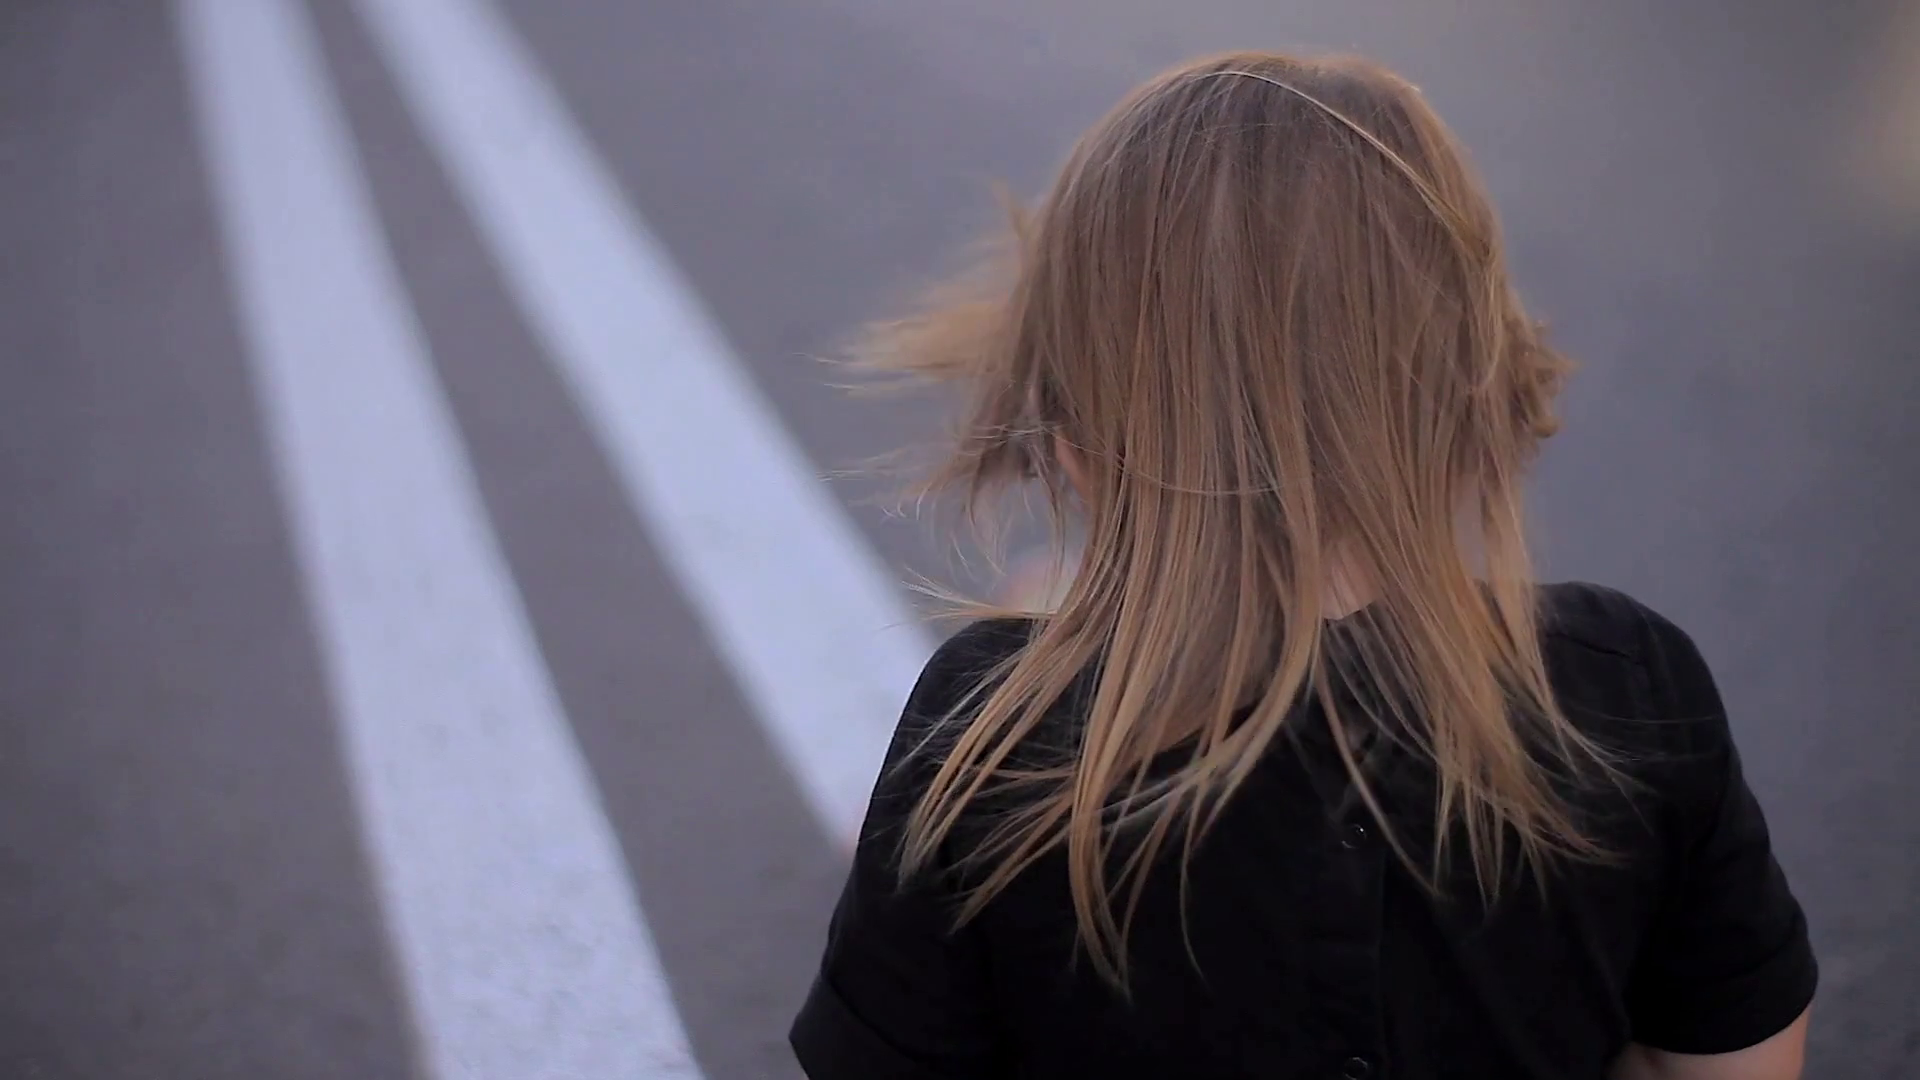 Slow Motion Effect - View From the Back - the Little Girl's Hair ...